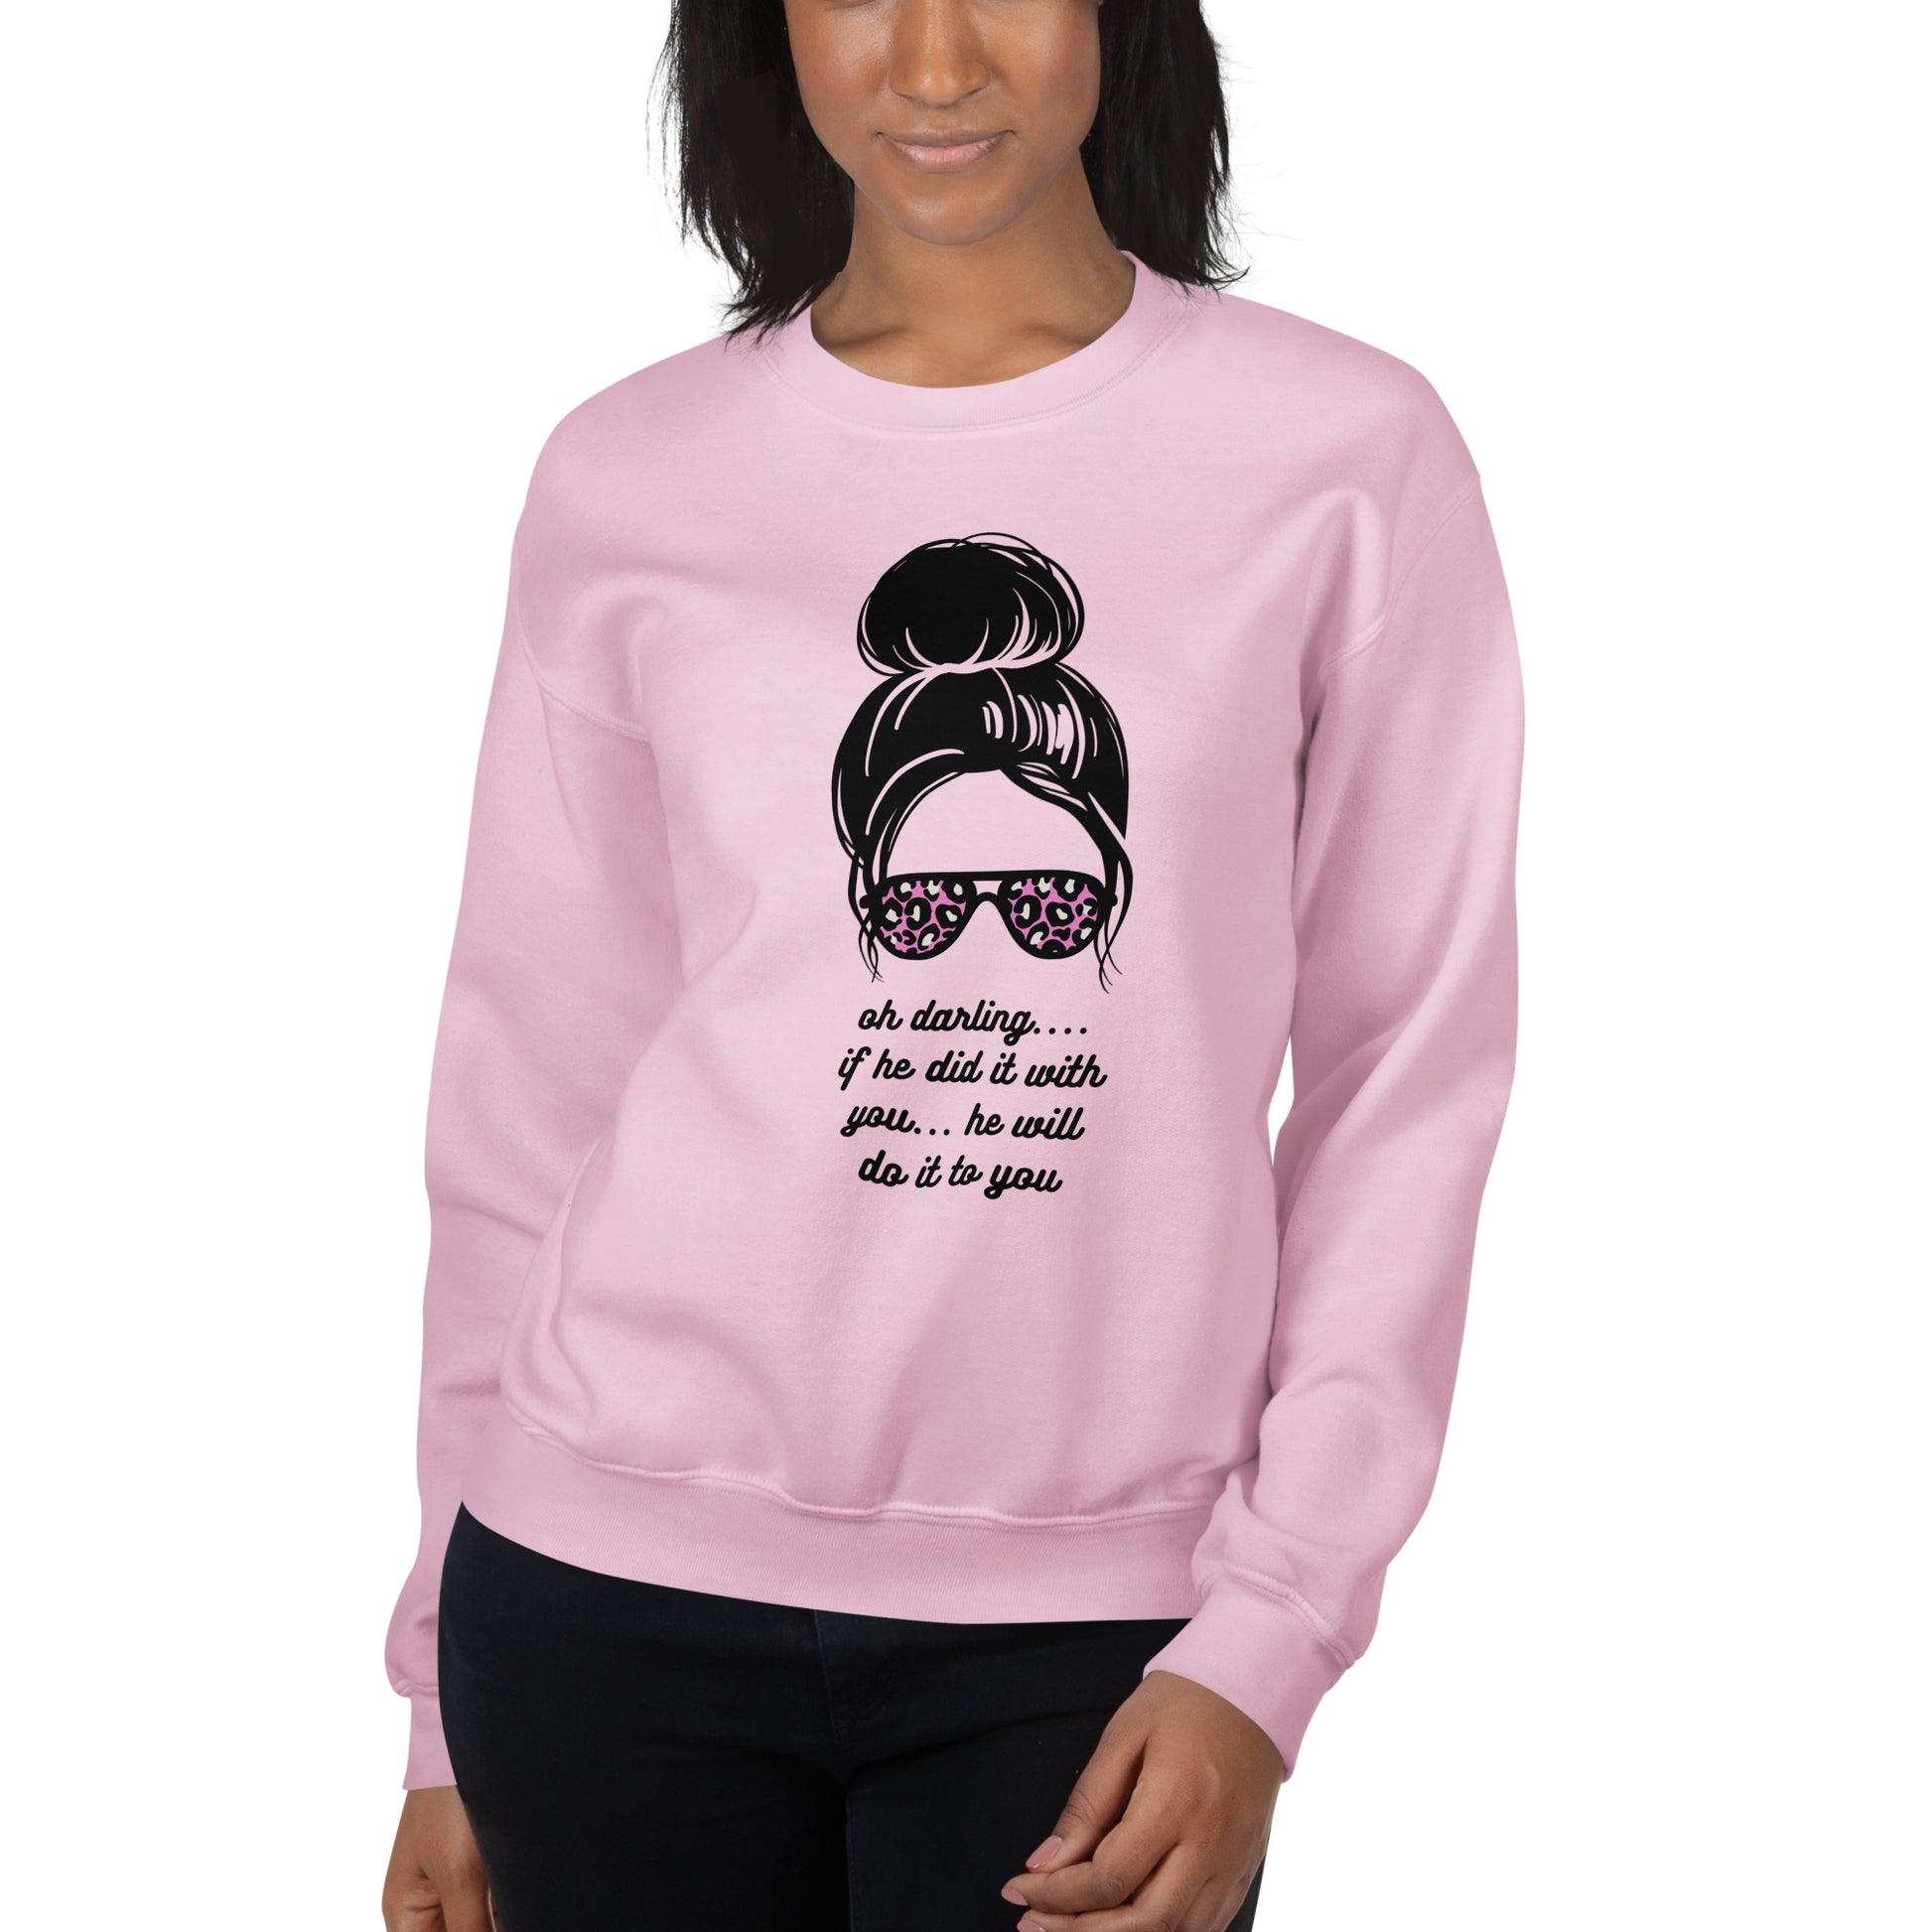 Unisex Sweatshirt - Oh Darling - If He Did it With You He'll Do It To You Sweatshirt Stylin' Spirit Light Pink S 